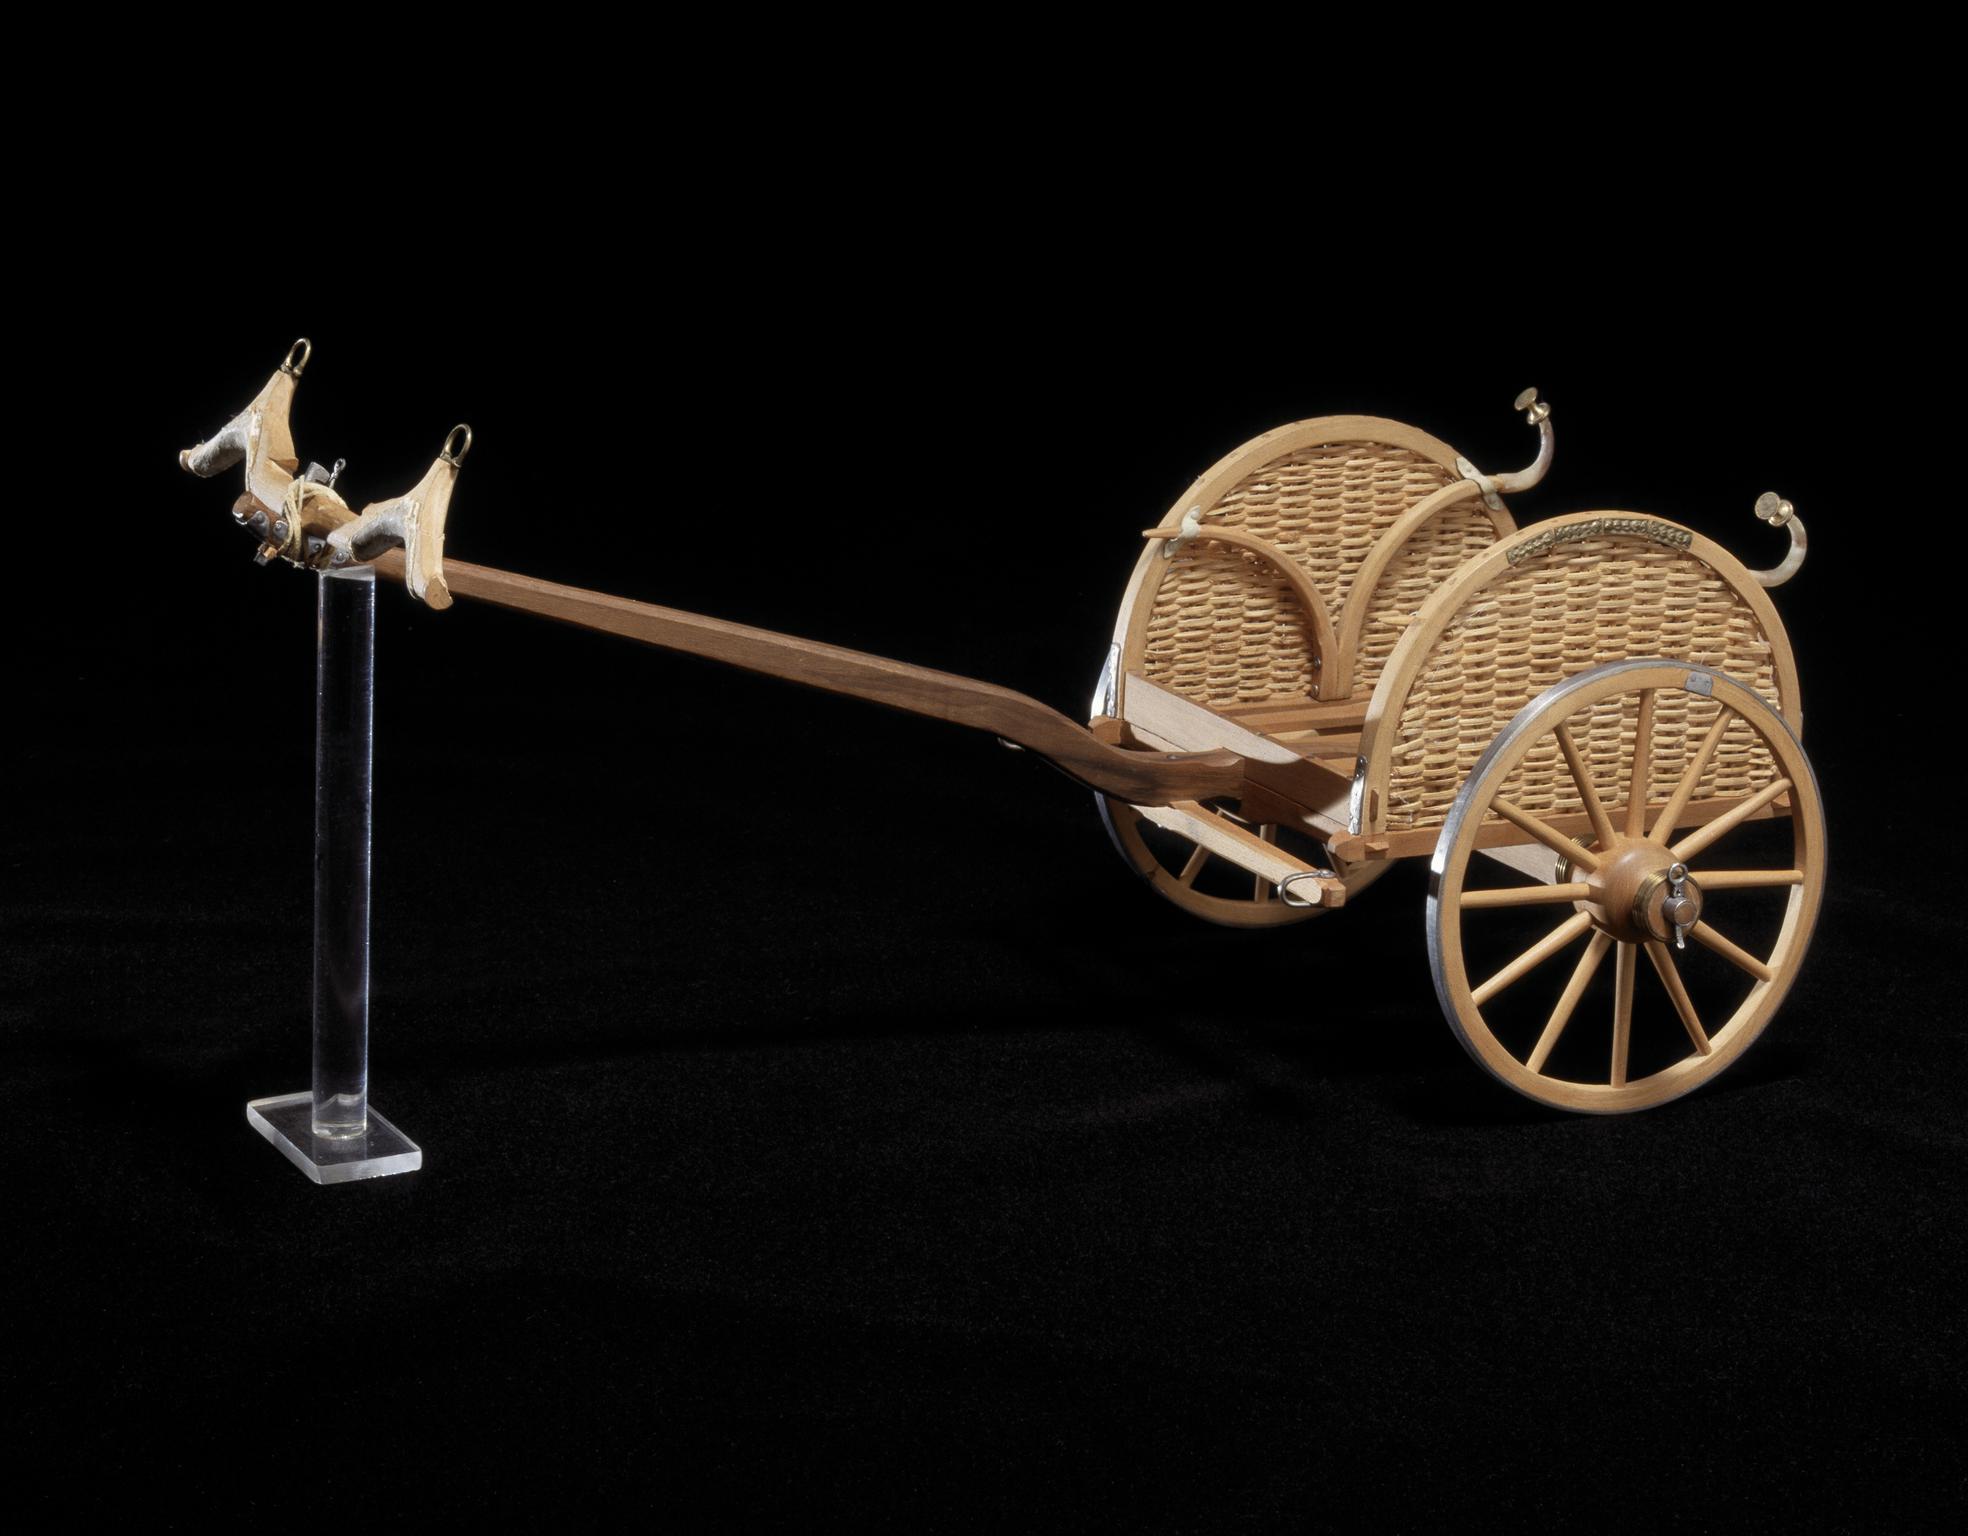 Iron Age chariot (model)